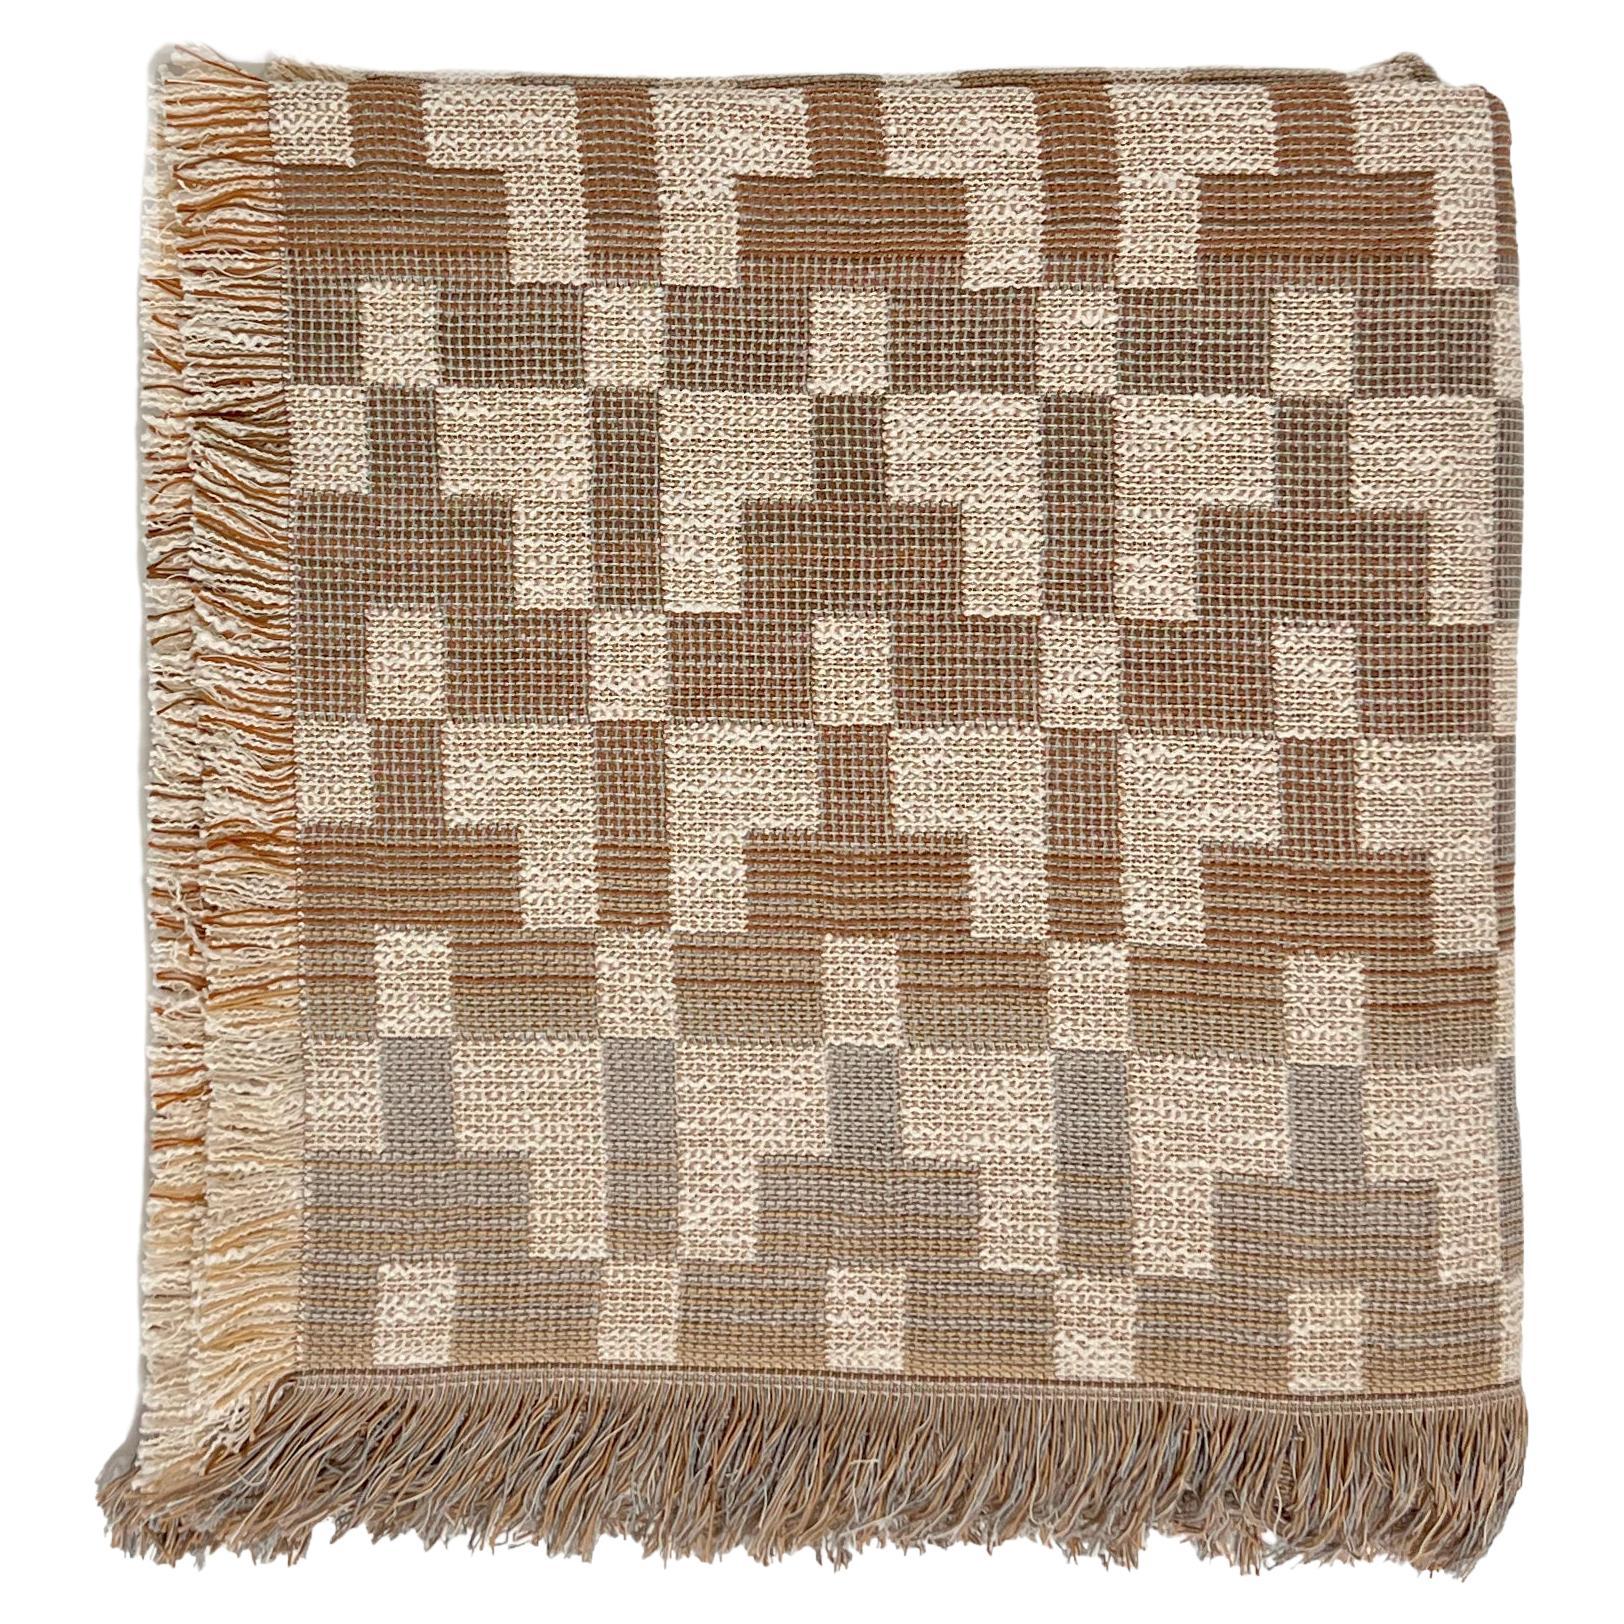 Patterned Woven Cotton Throw Blanket by Folk Textiles (Esme / Rust) For Sale